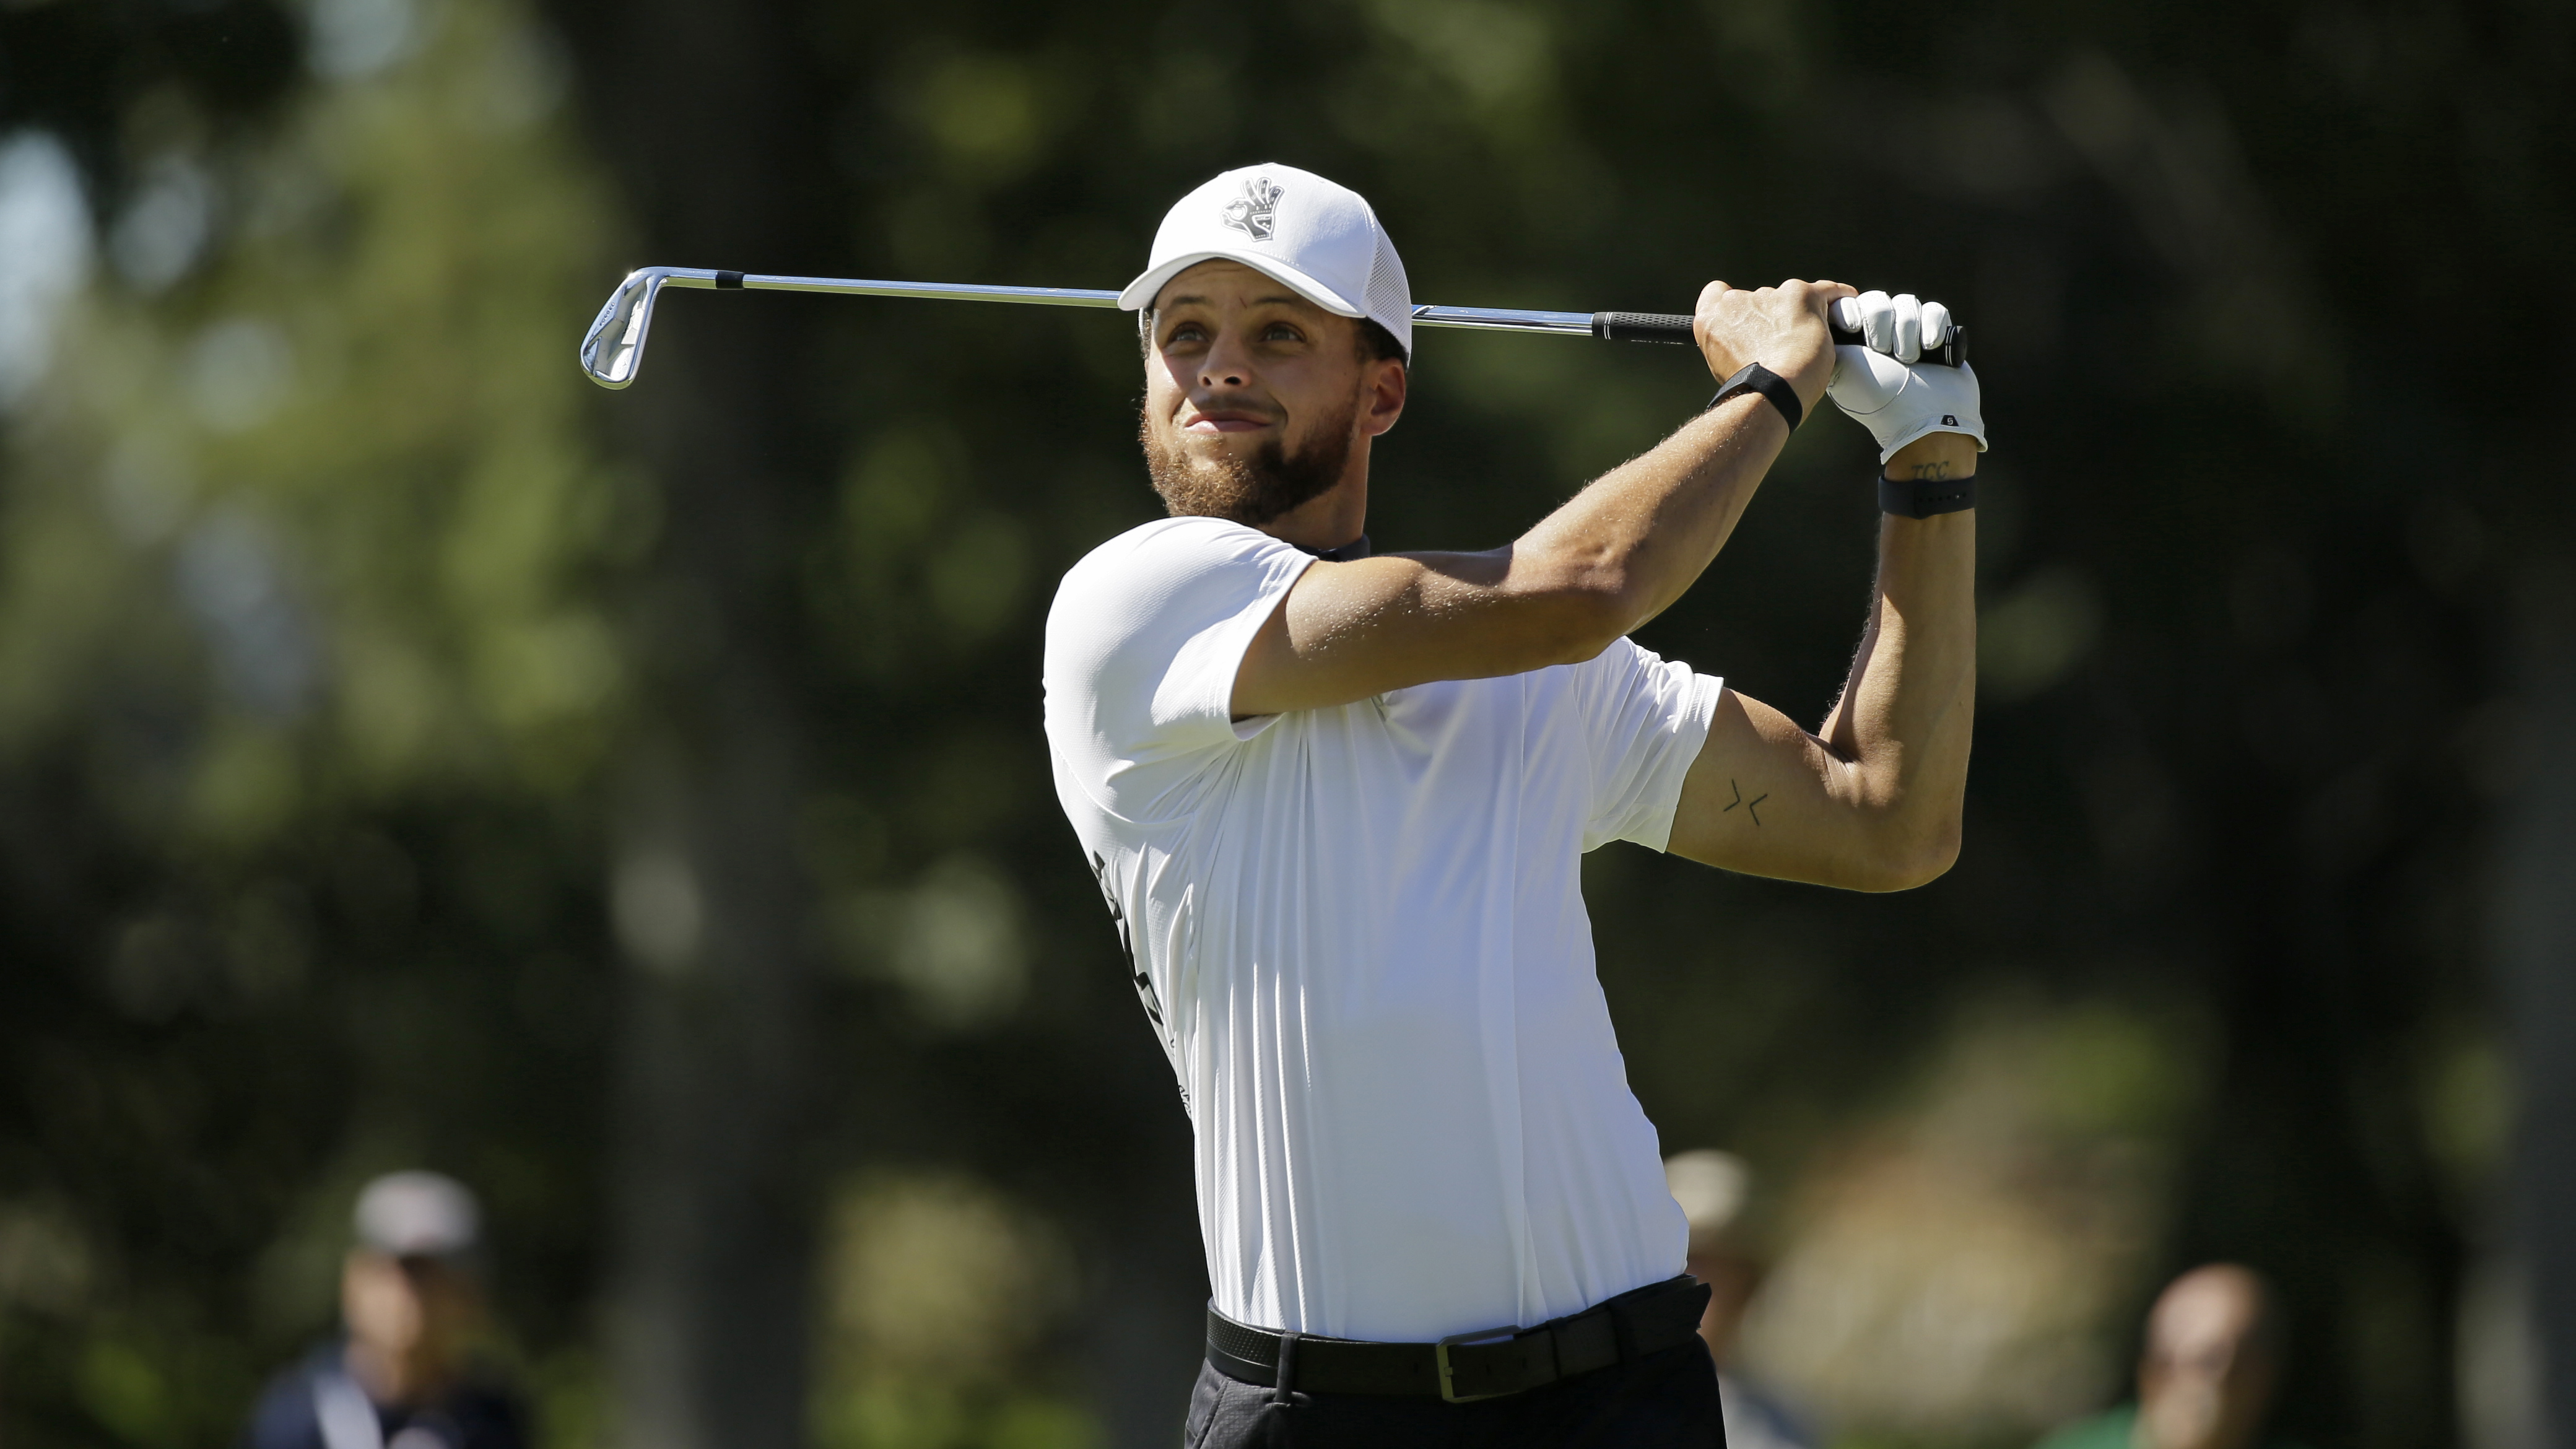 With Steph Curry Donation, Howard University Brings Back Golf Team